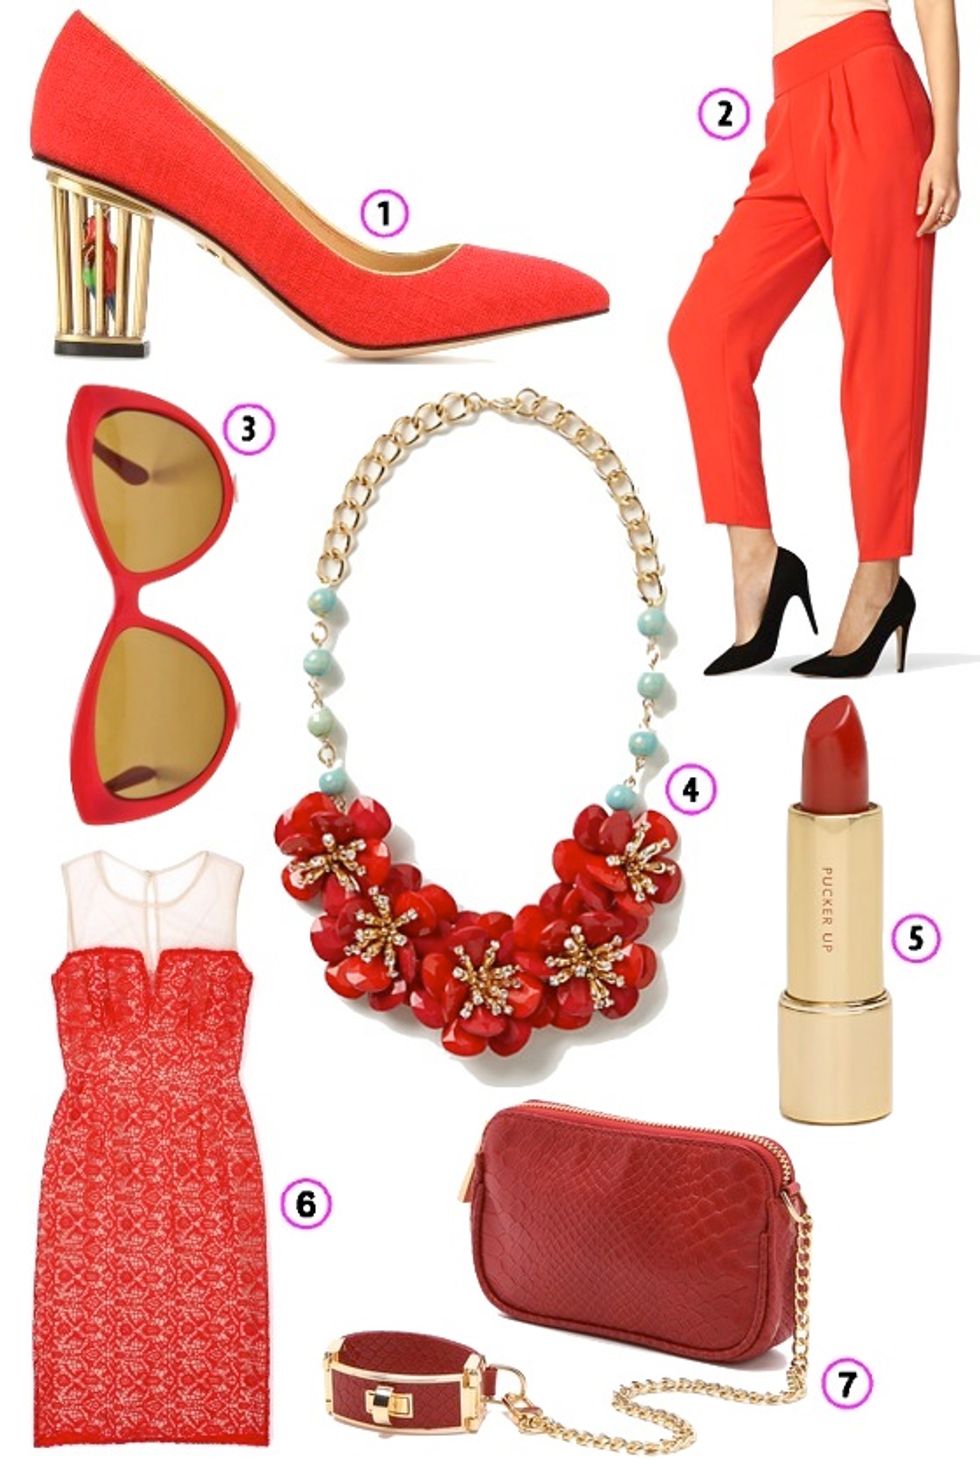 Look of the Week: Lady in Red